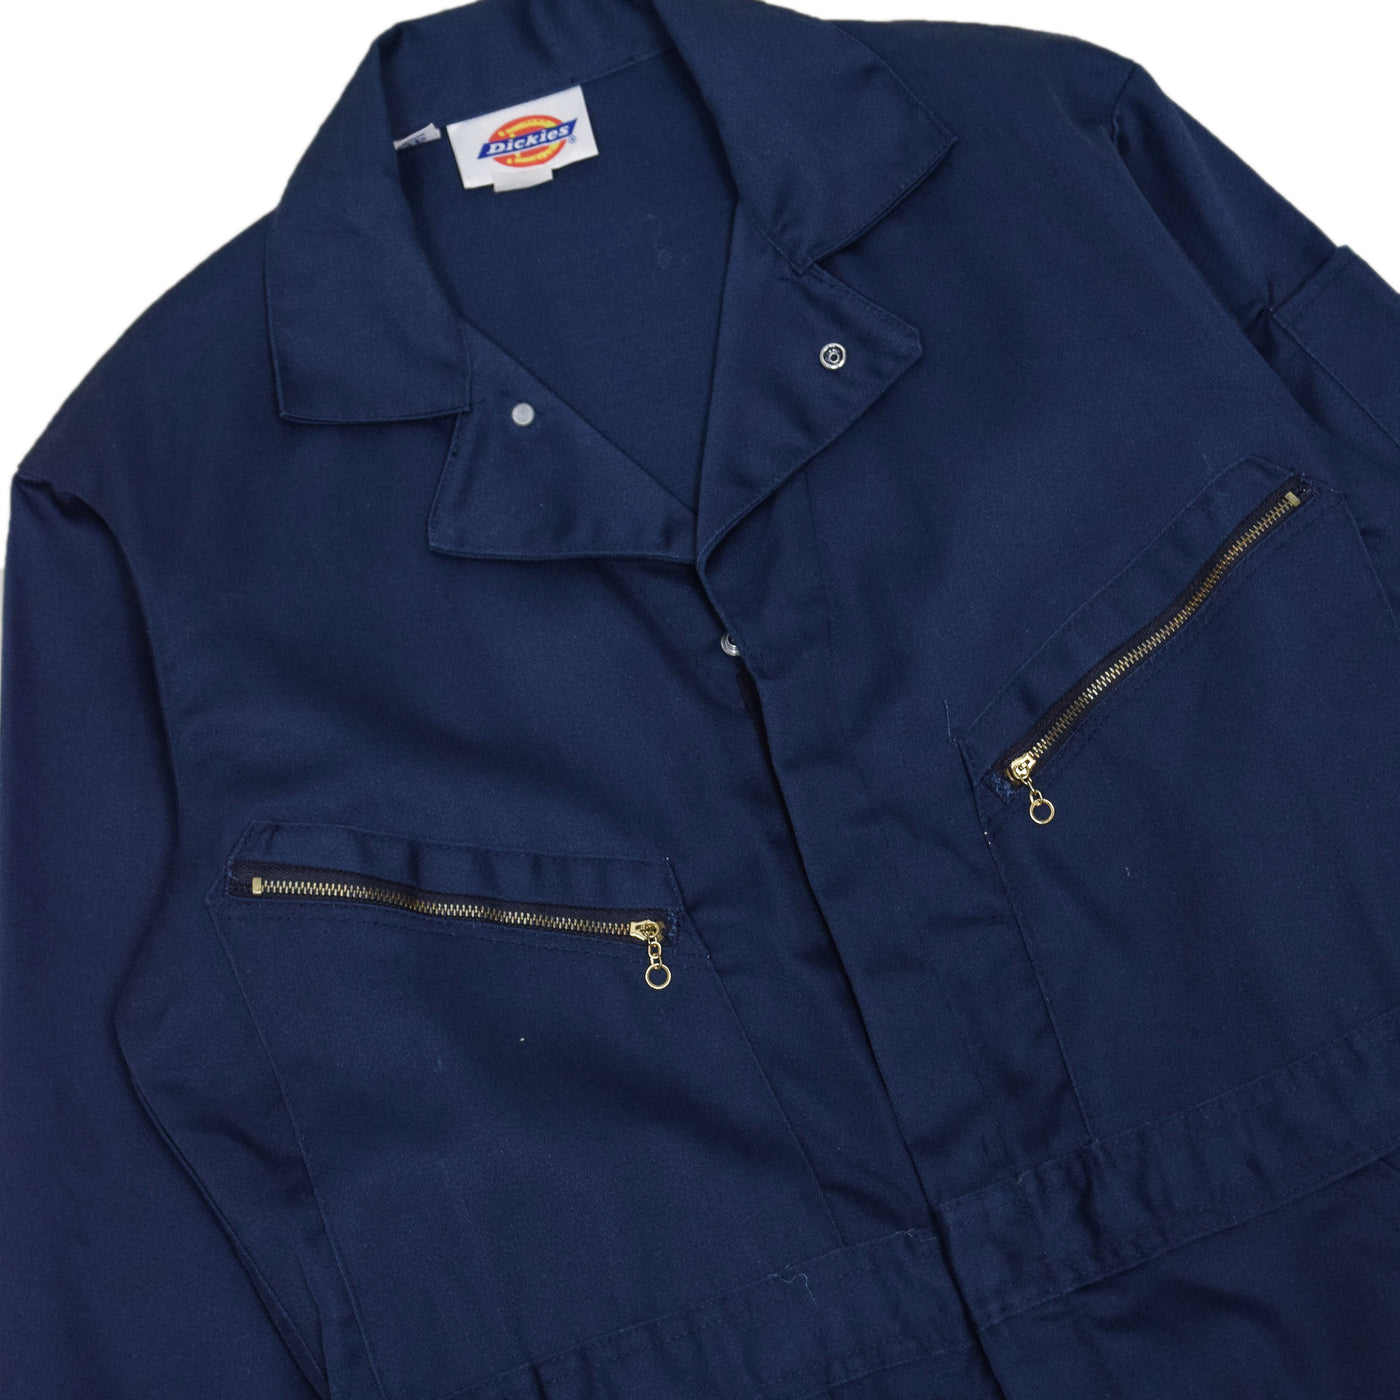 Vintage Dickies Workwear Coverall Navy Blue Cotton Blend Boiler Suit S / M-FRONT DETAIL